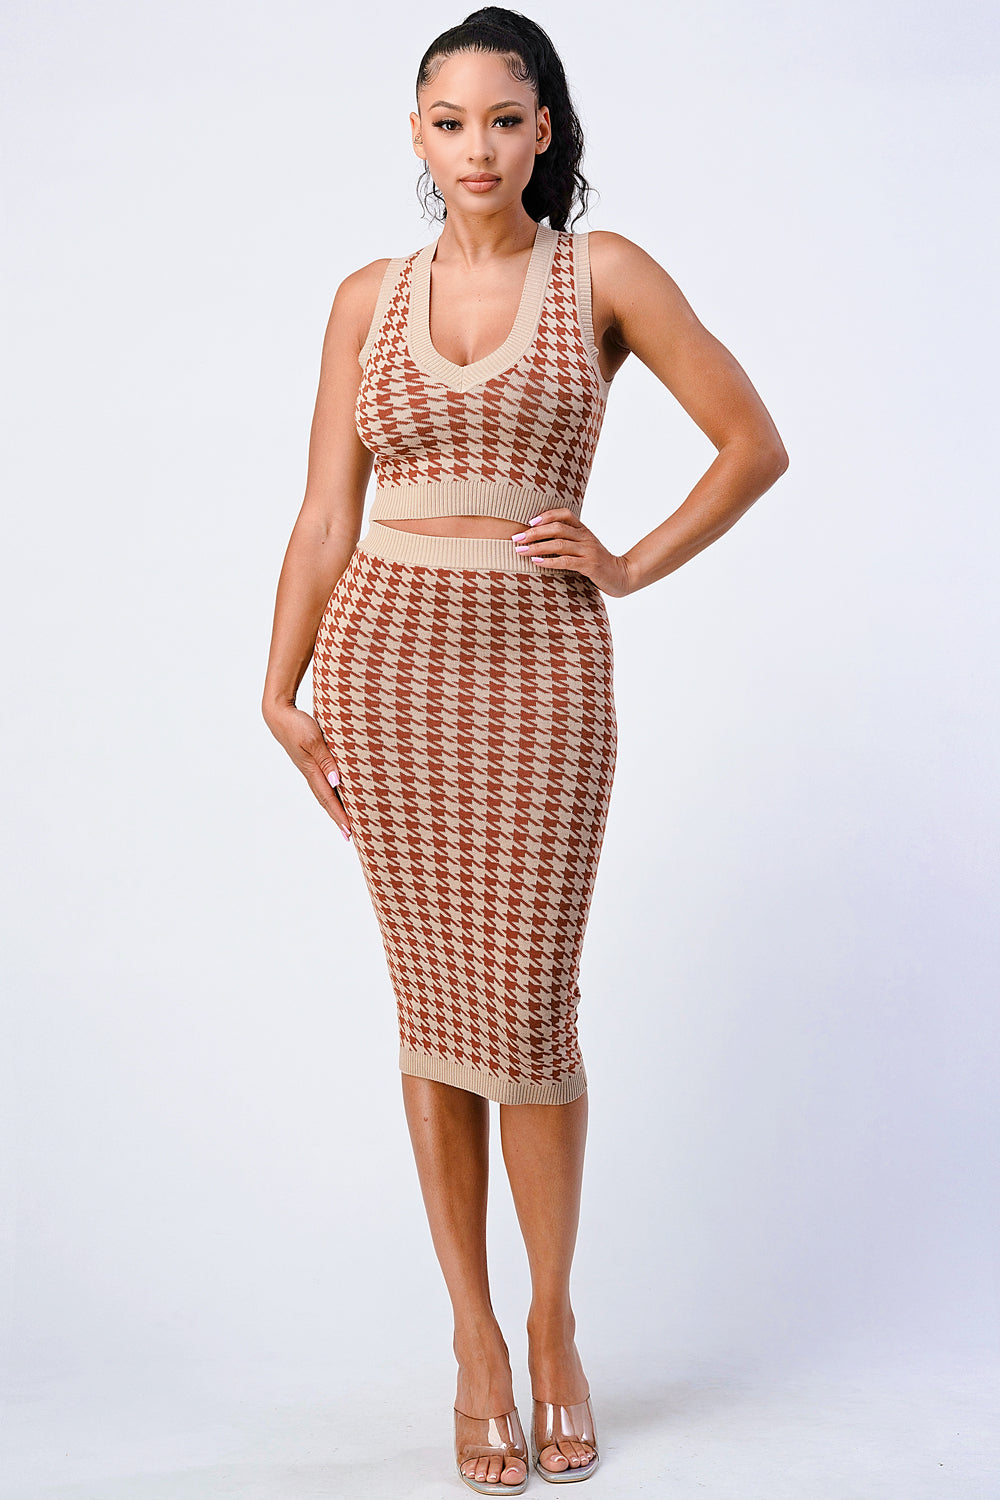 Luxe Gingham Rib Knit Taupe brown Top And Skirt Sets Matching Sets jehouze 